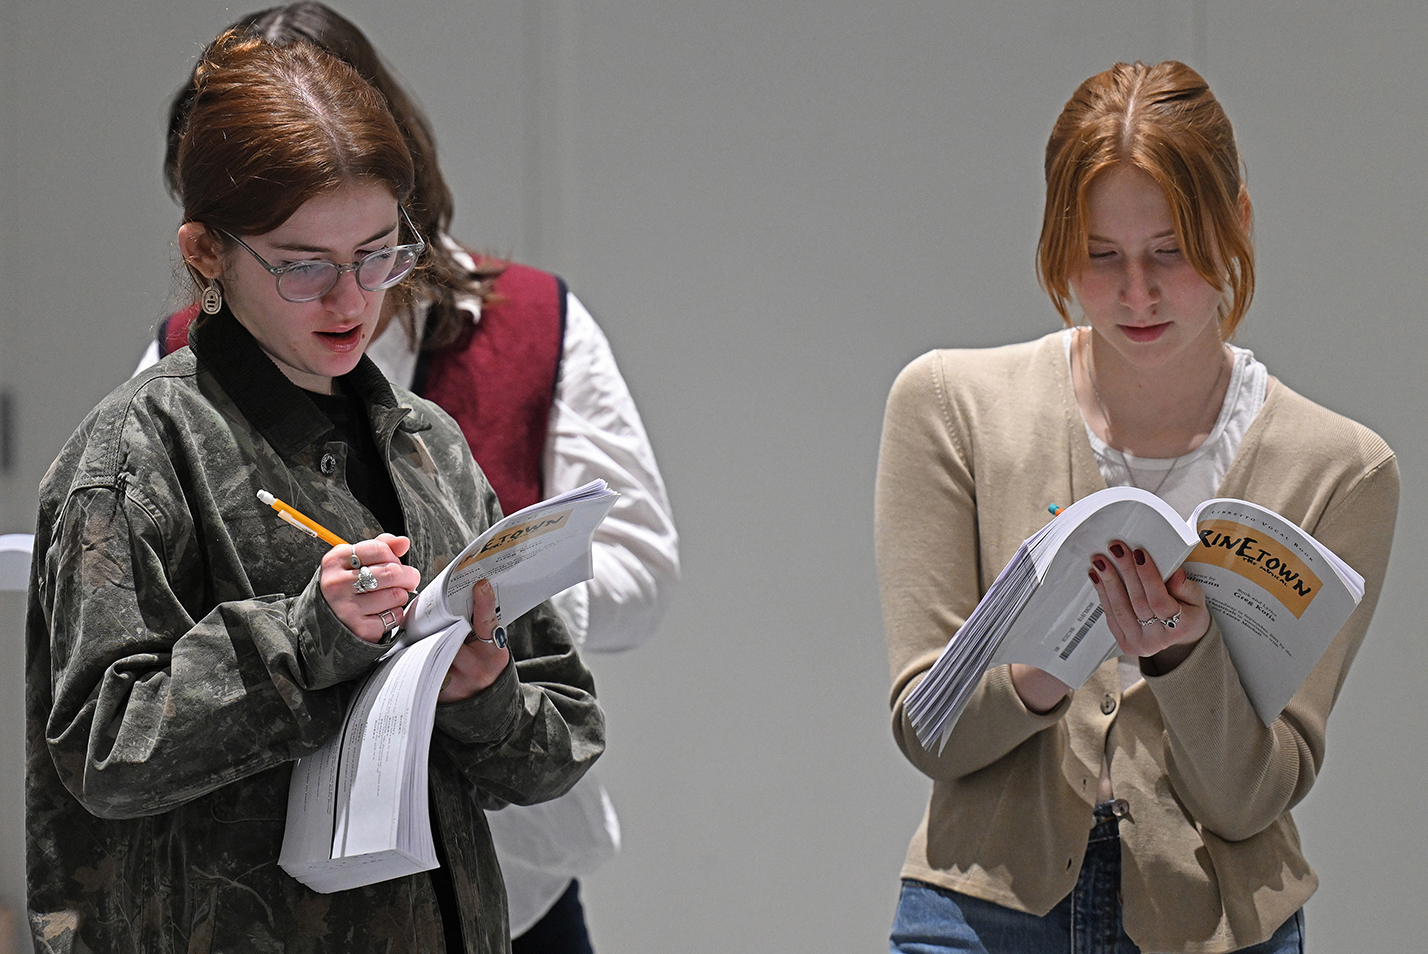 two actors make notations in script books